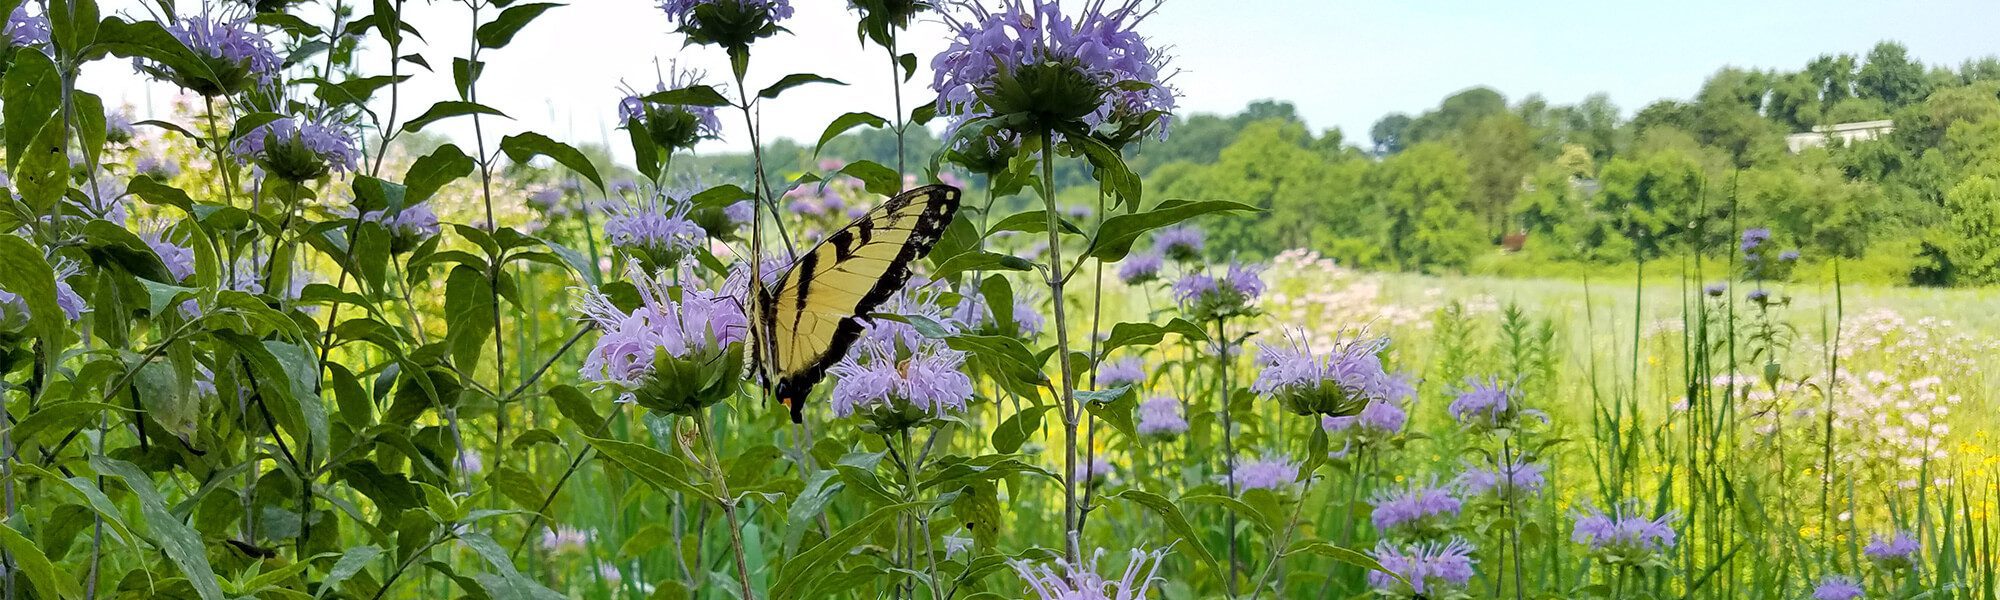 Tiger Swallowtail butterfly on beebalm flowers at Burrows Run meadows in Coverdale benefits from our wildlife habitat restoration. Photo by Christi Leeson